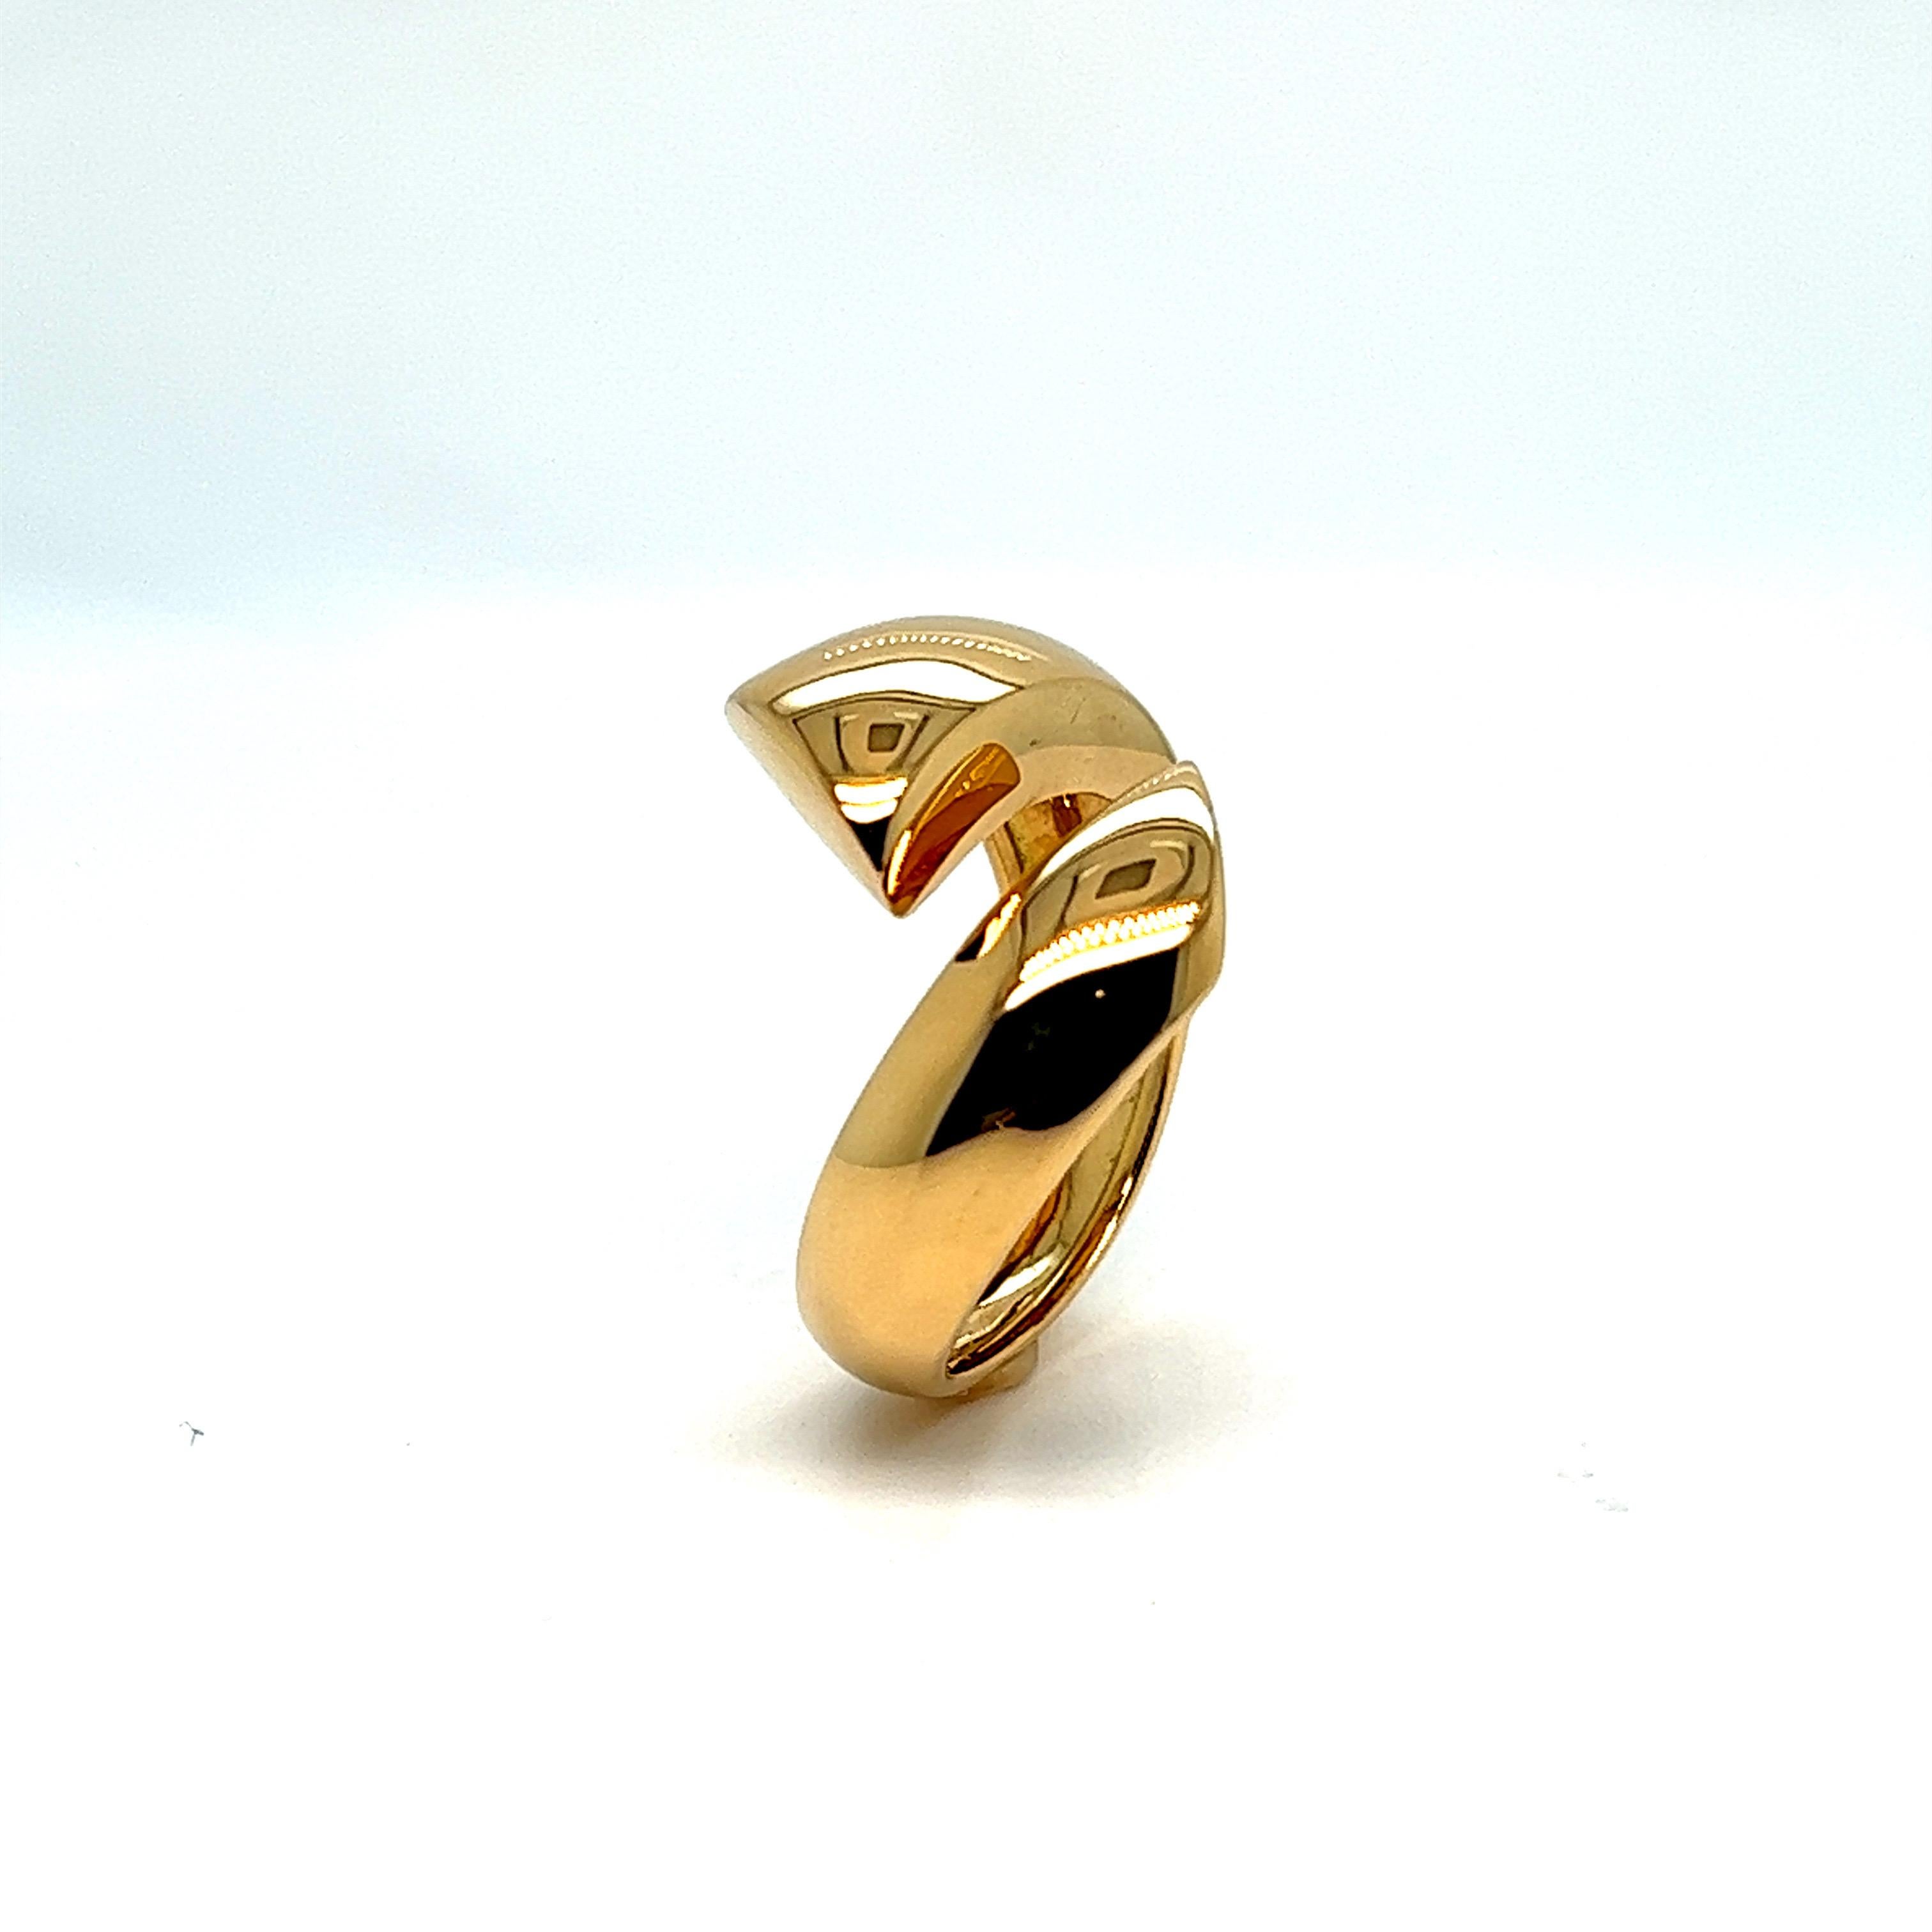 Women's French Ring Embracing 